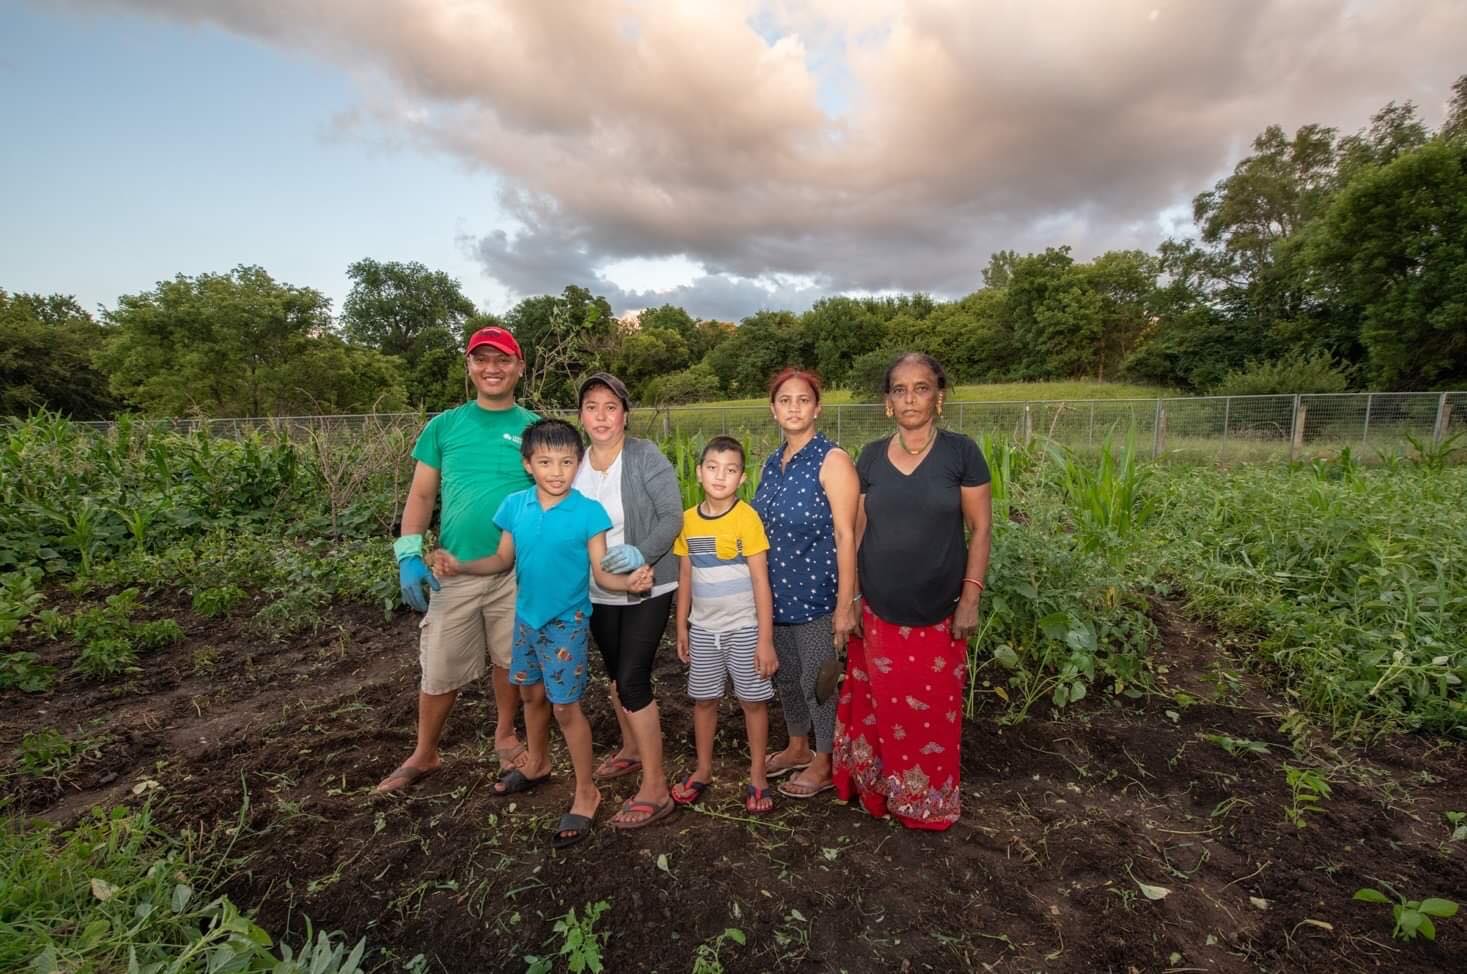 Himal Gurung (at far left) and Indra Gurung (third from far left) with relatives at Global Roots Farm